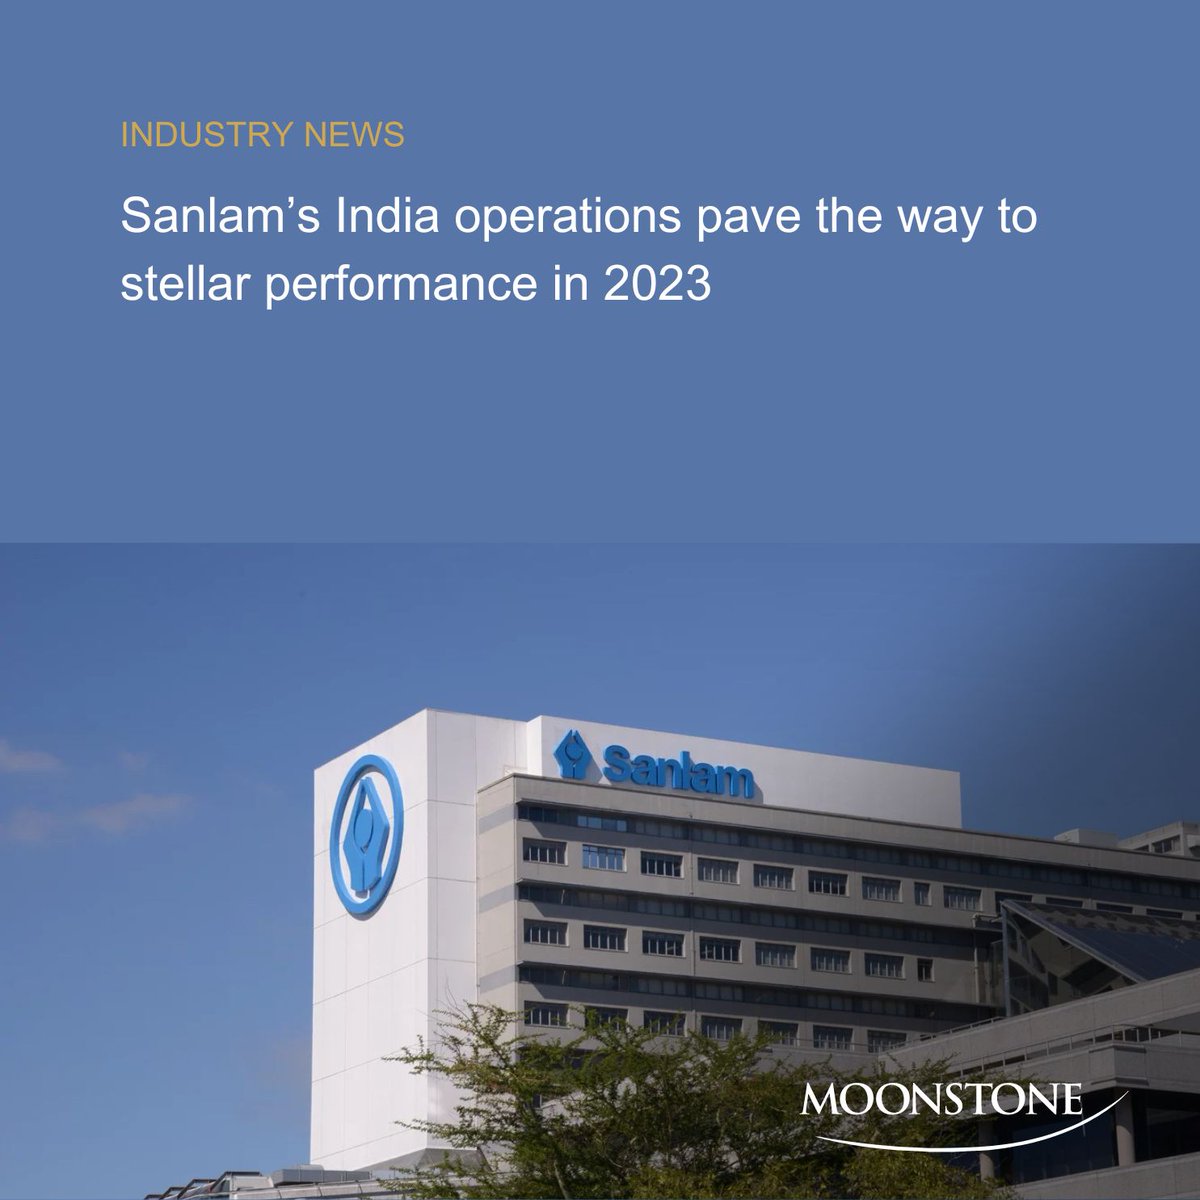 From record-breaking profits to strategic expansion: Sanlam’s India operations steal the show in 2023 results. 

Read the full article to get more insight: moonstone.co.za/sanlams-india-… 

Like, share, comment and SUBSCRIBE.

#Sanlam #2023annualresults #SanlamAllianz #PaulHanratty